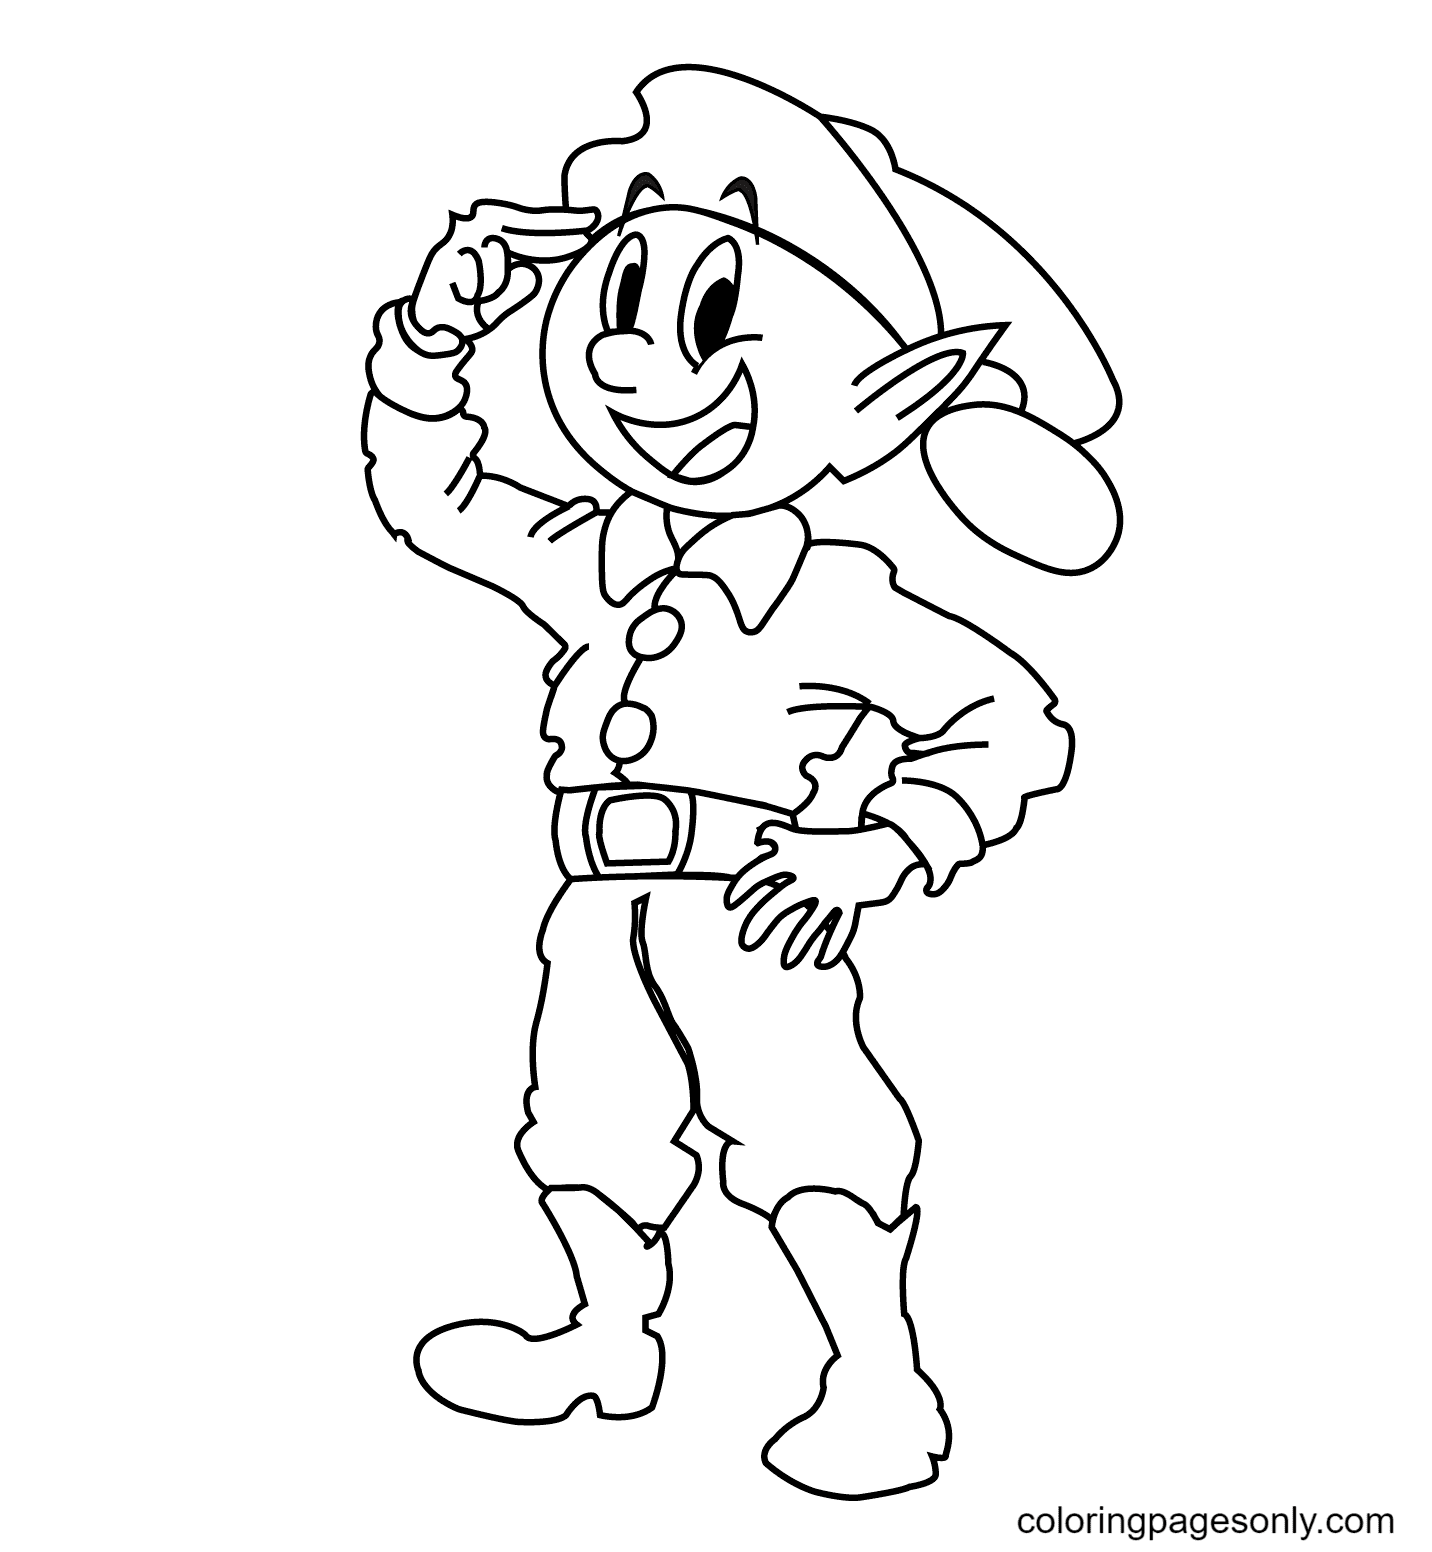 Funny Elf Coloring Page